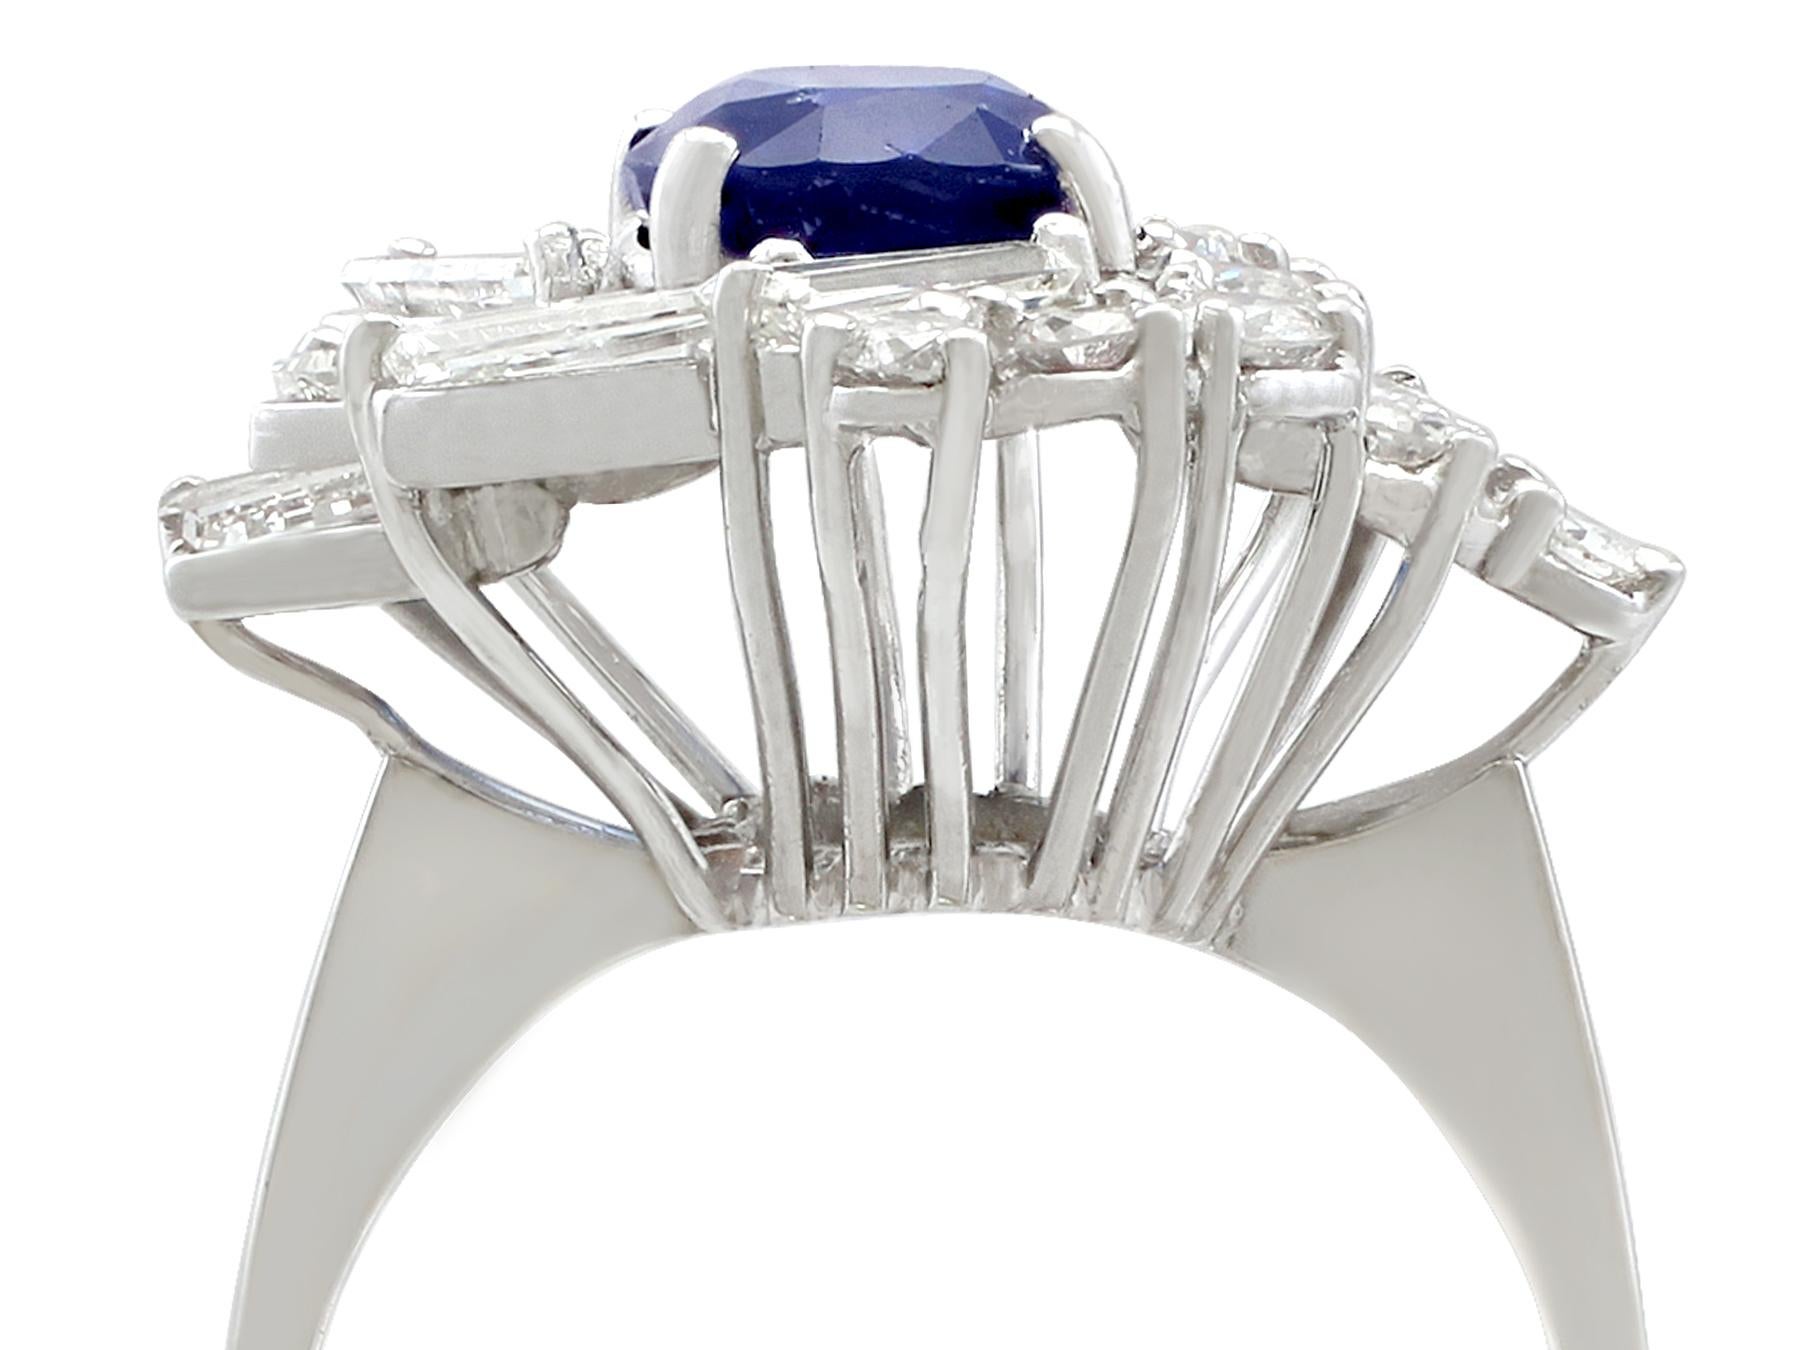 A stunning, fine and impressive 2.45 Carat blue sapphire and 2.23 Carat diamond, 18 karat white gold cluster ring; part of our diverse vintage jewelry collections

This stunning, fine and impressive vintage sapphire and diamond cluster ring has been